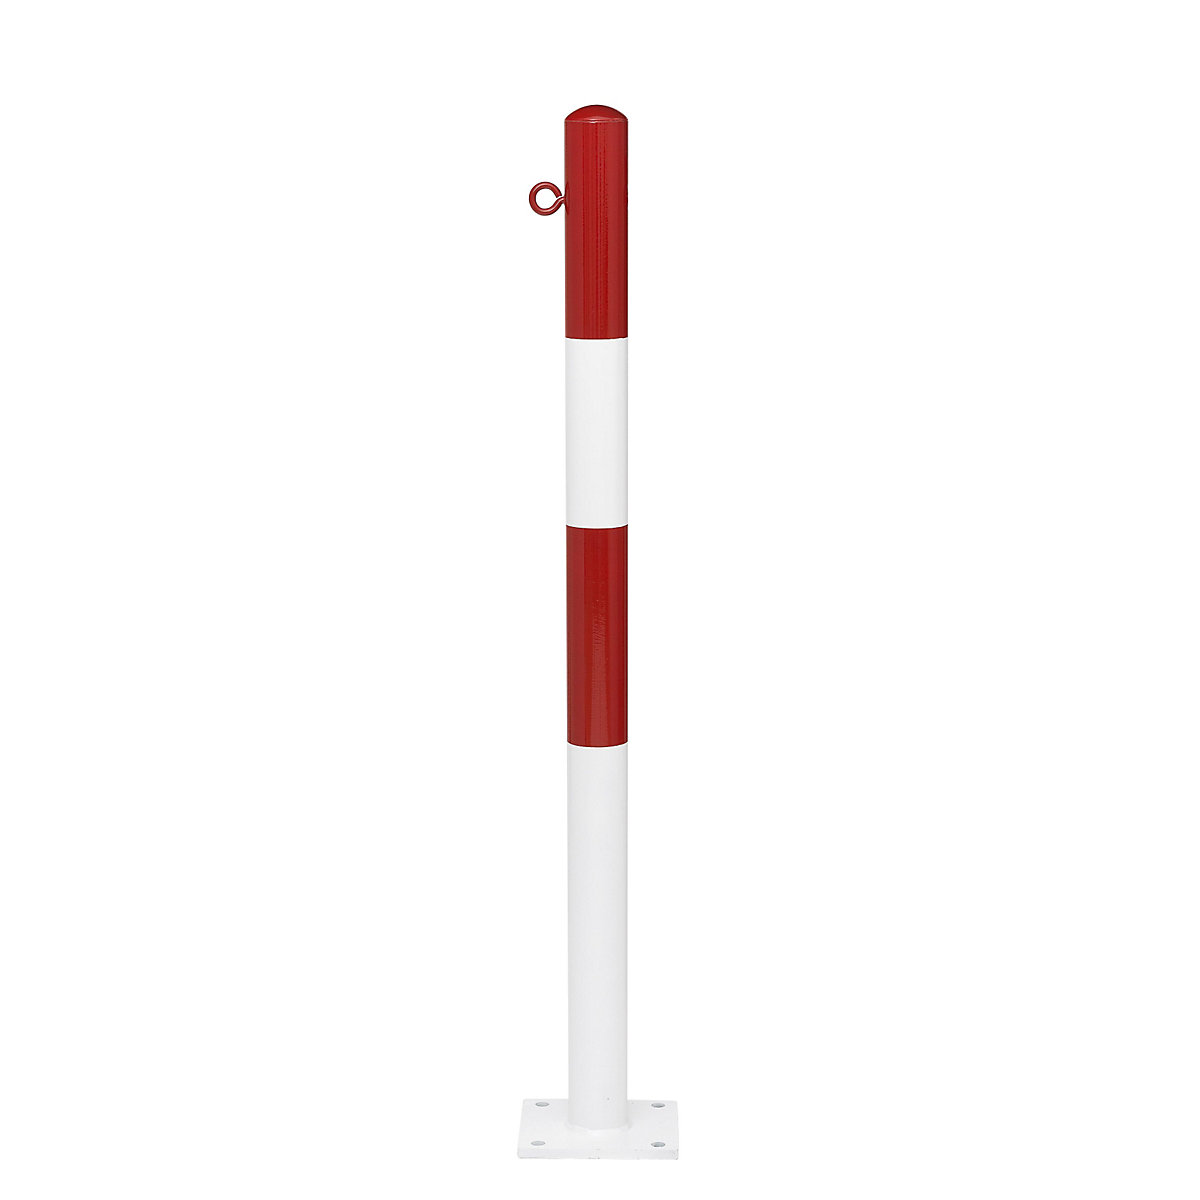 Barrier post, for bolting in place, Ø 90 mm, red/white plastic coated, 1 eyelet-10